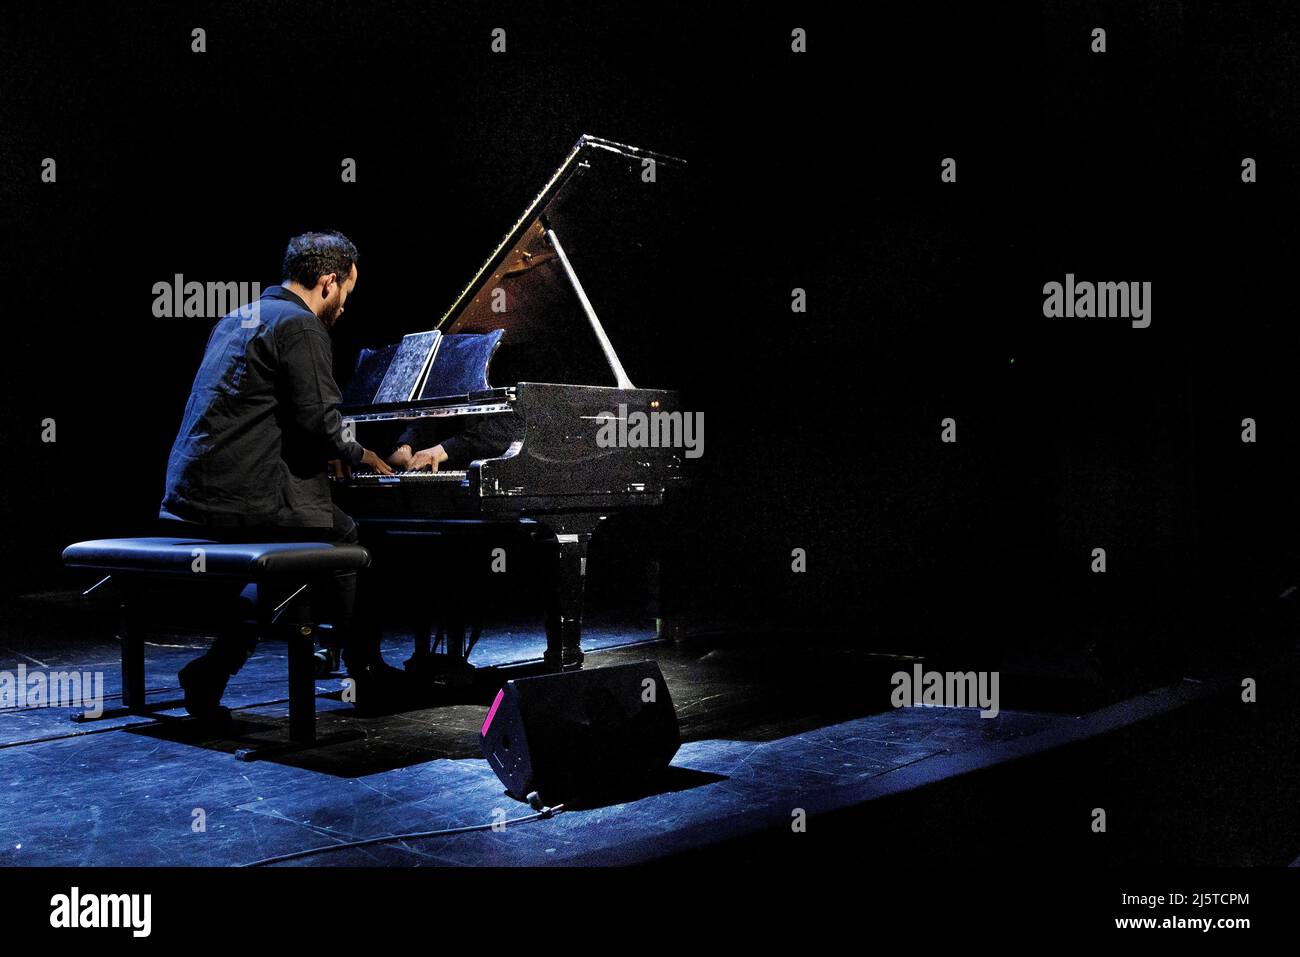 Berlin, Germany. 25th Apr, 2022. Pianist Igor Levit plays at a benefit concert for Ukraine at the Berliner Ensemble. Credit: Carsten Koall/dpa/Alamy Live News Stock Photo